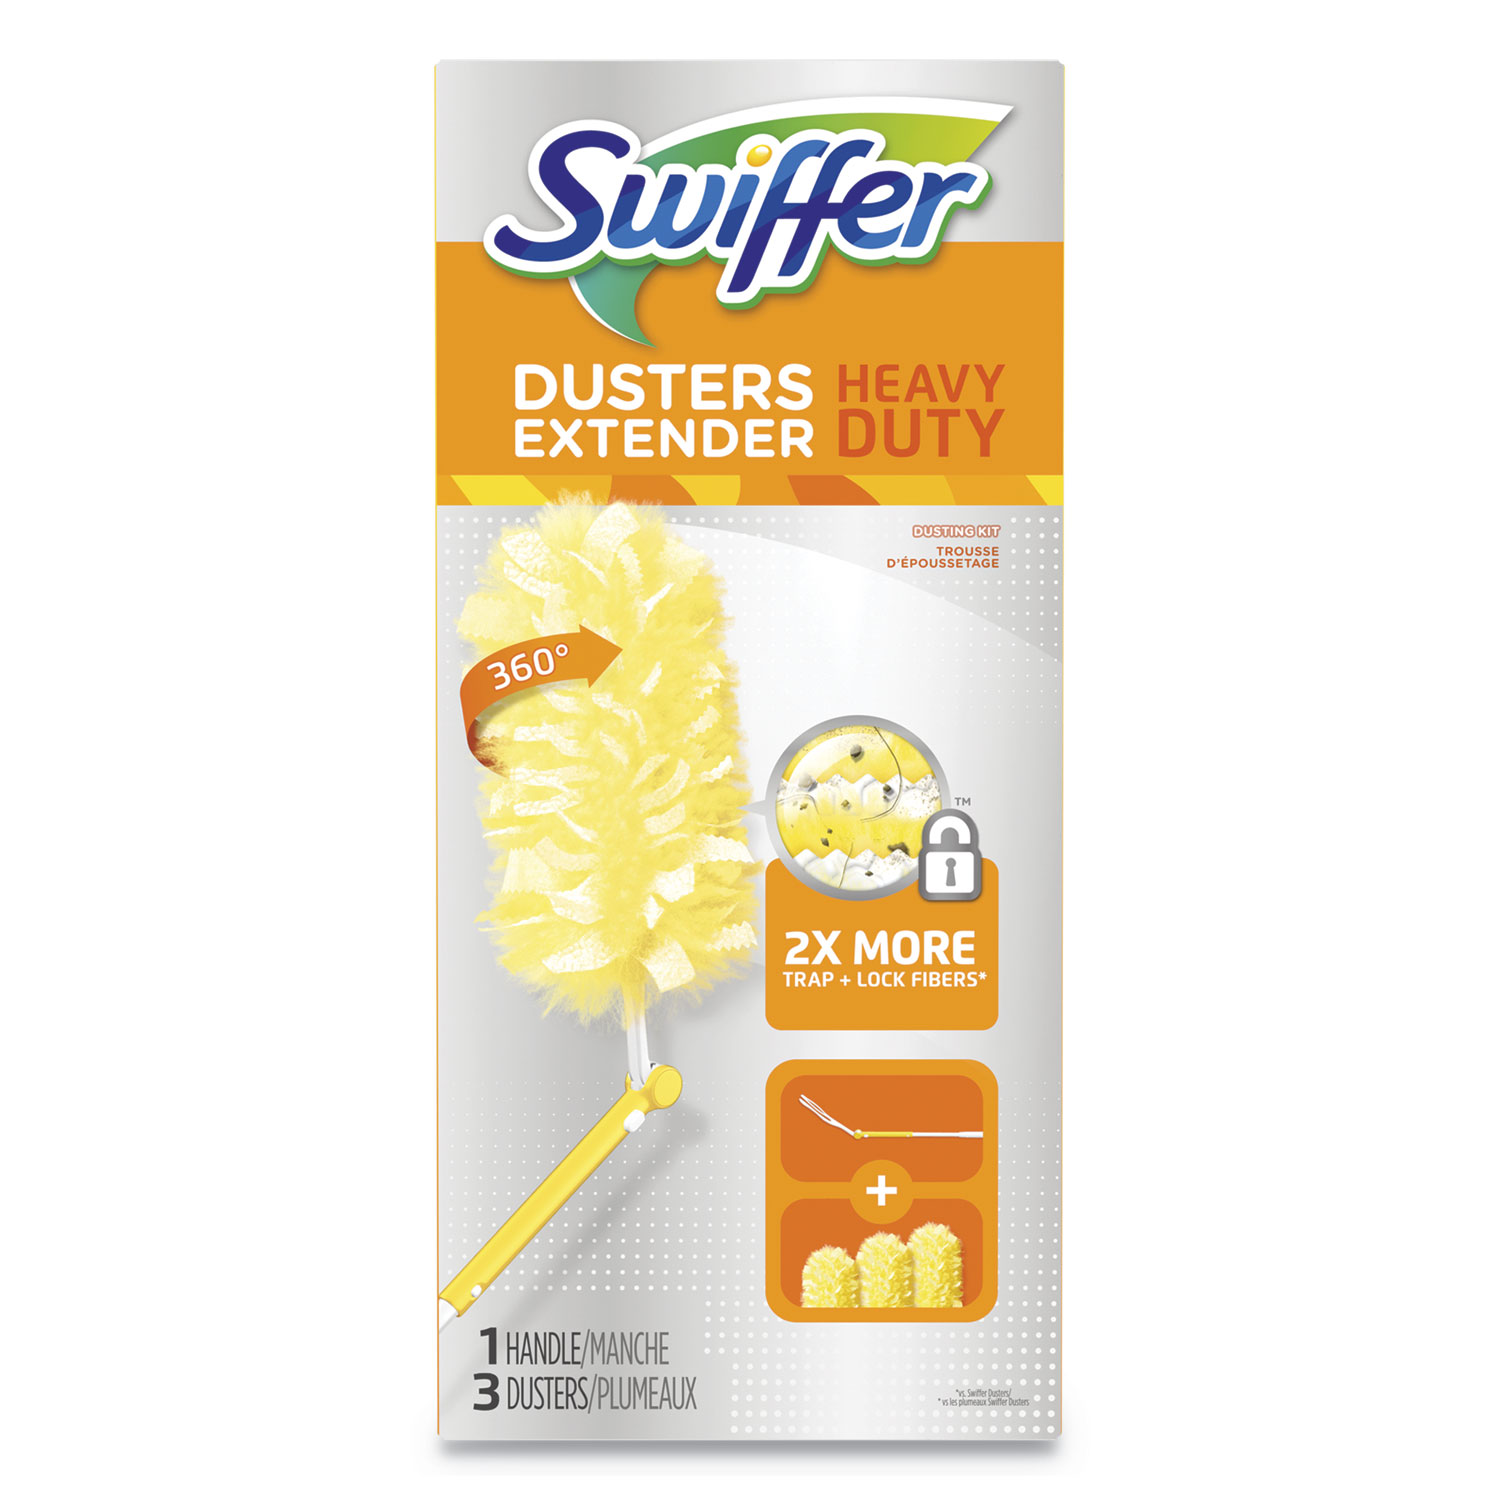 Swiffer Heavy Duty Dusters, Plastic Handle Extends to 3 ft, 1 Handle and 3 Dusters/Kit